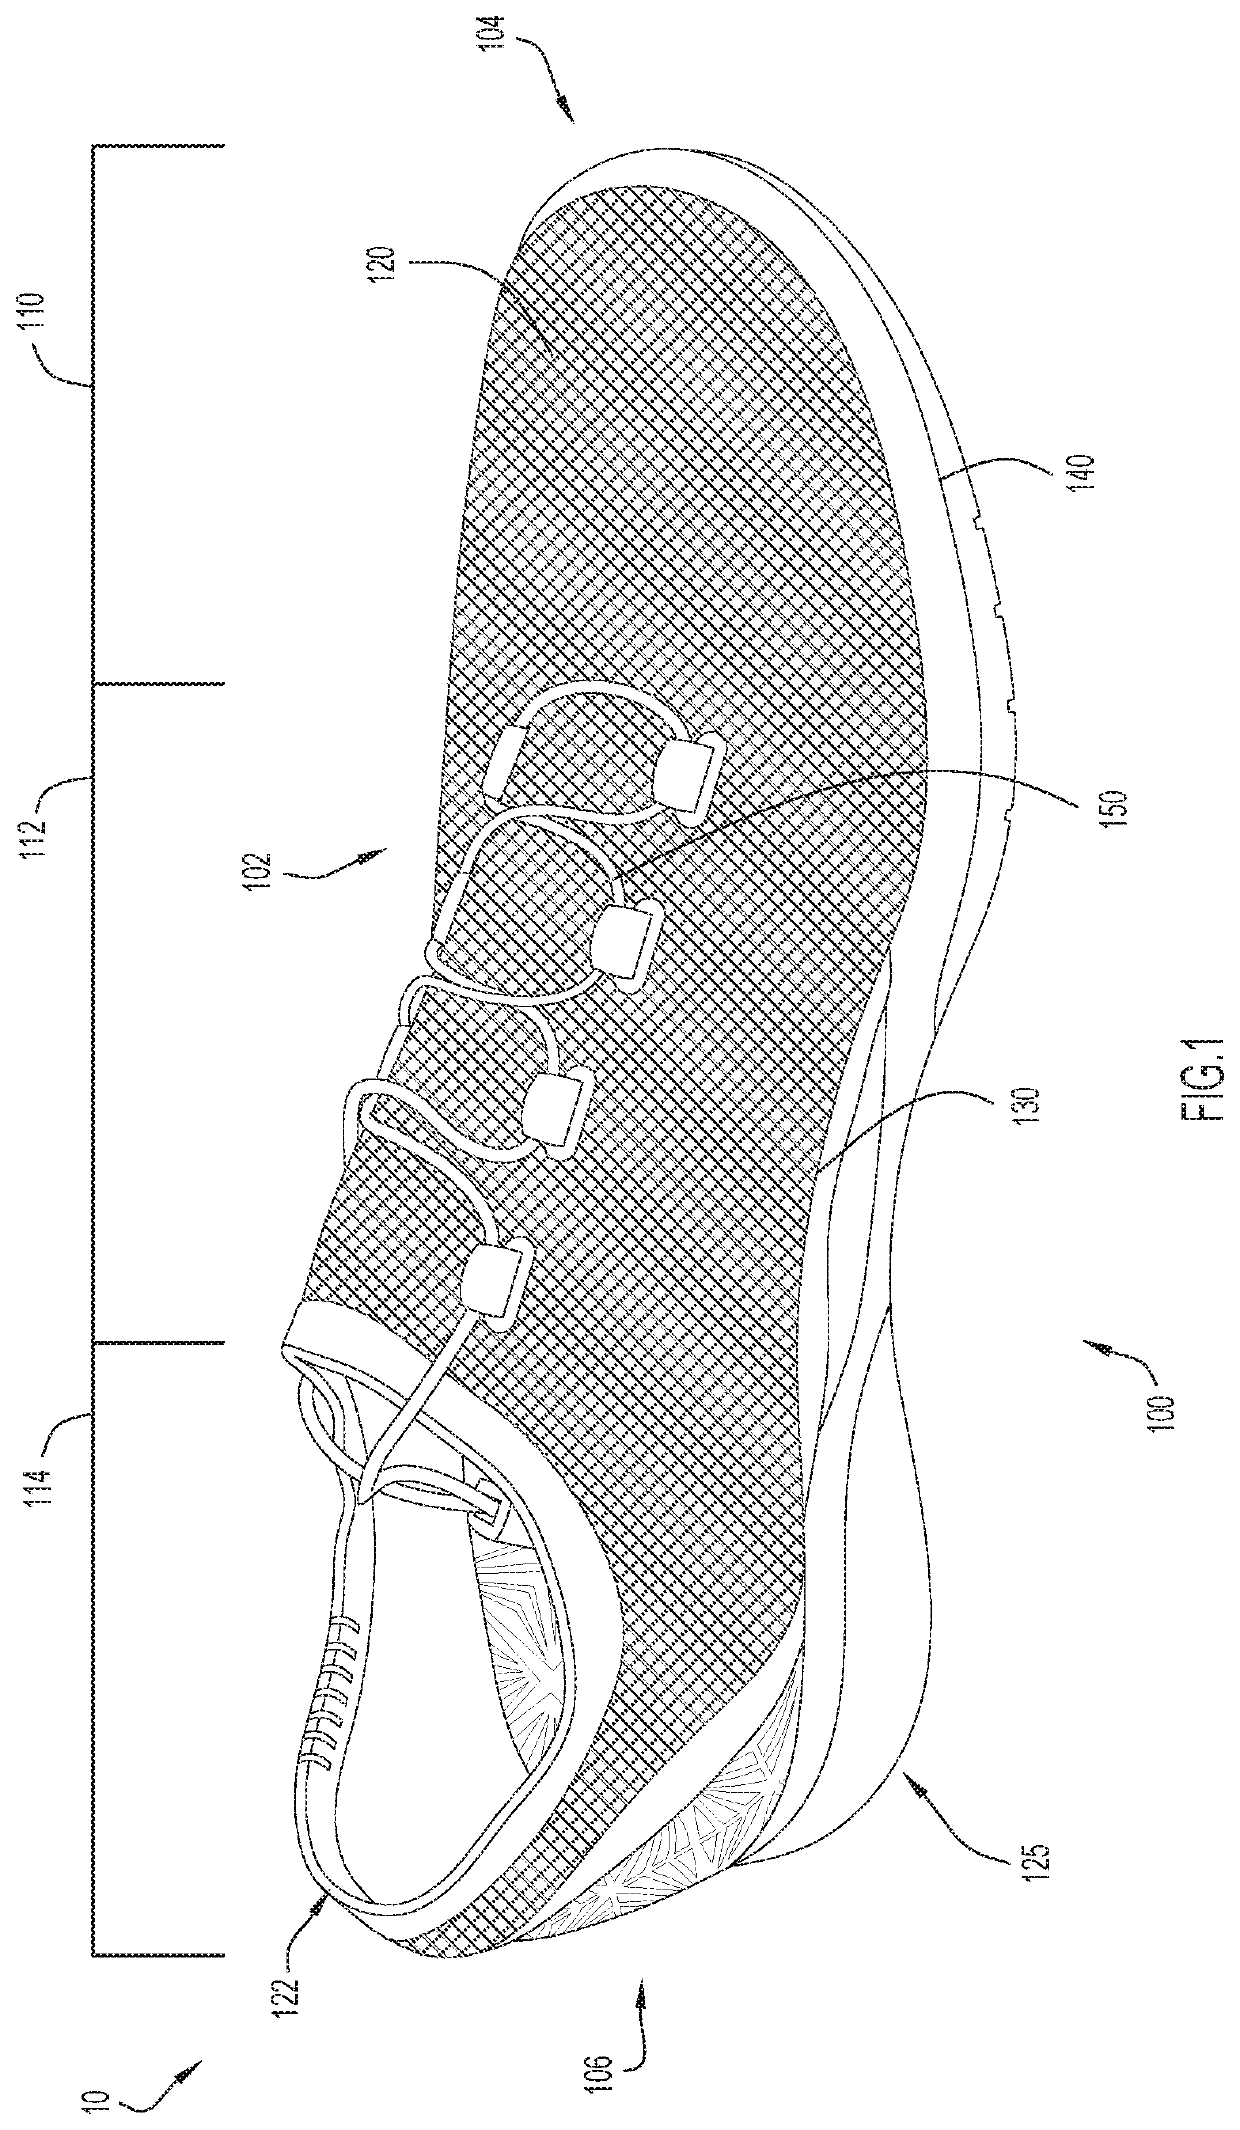 Article of footwear with cooling features